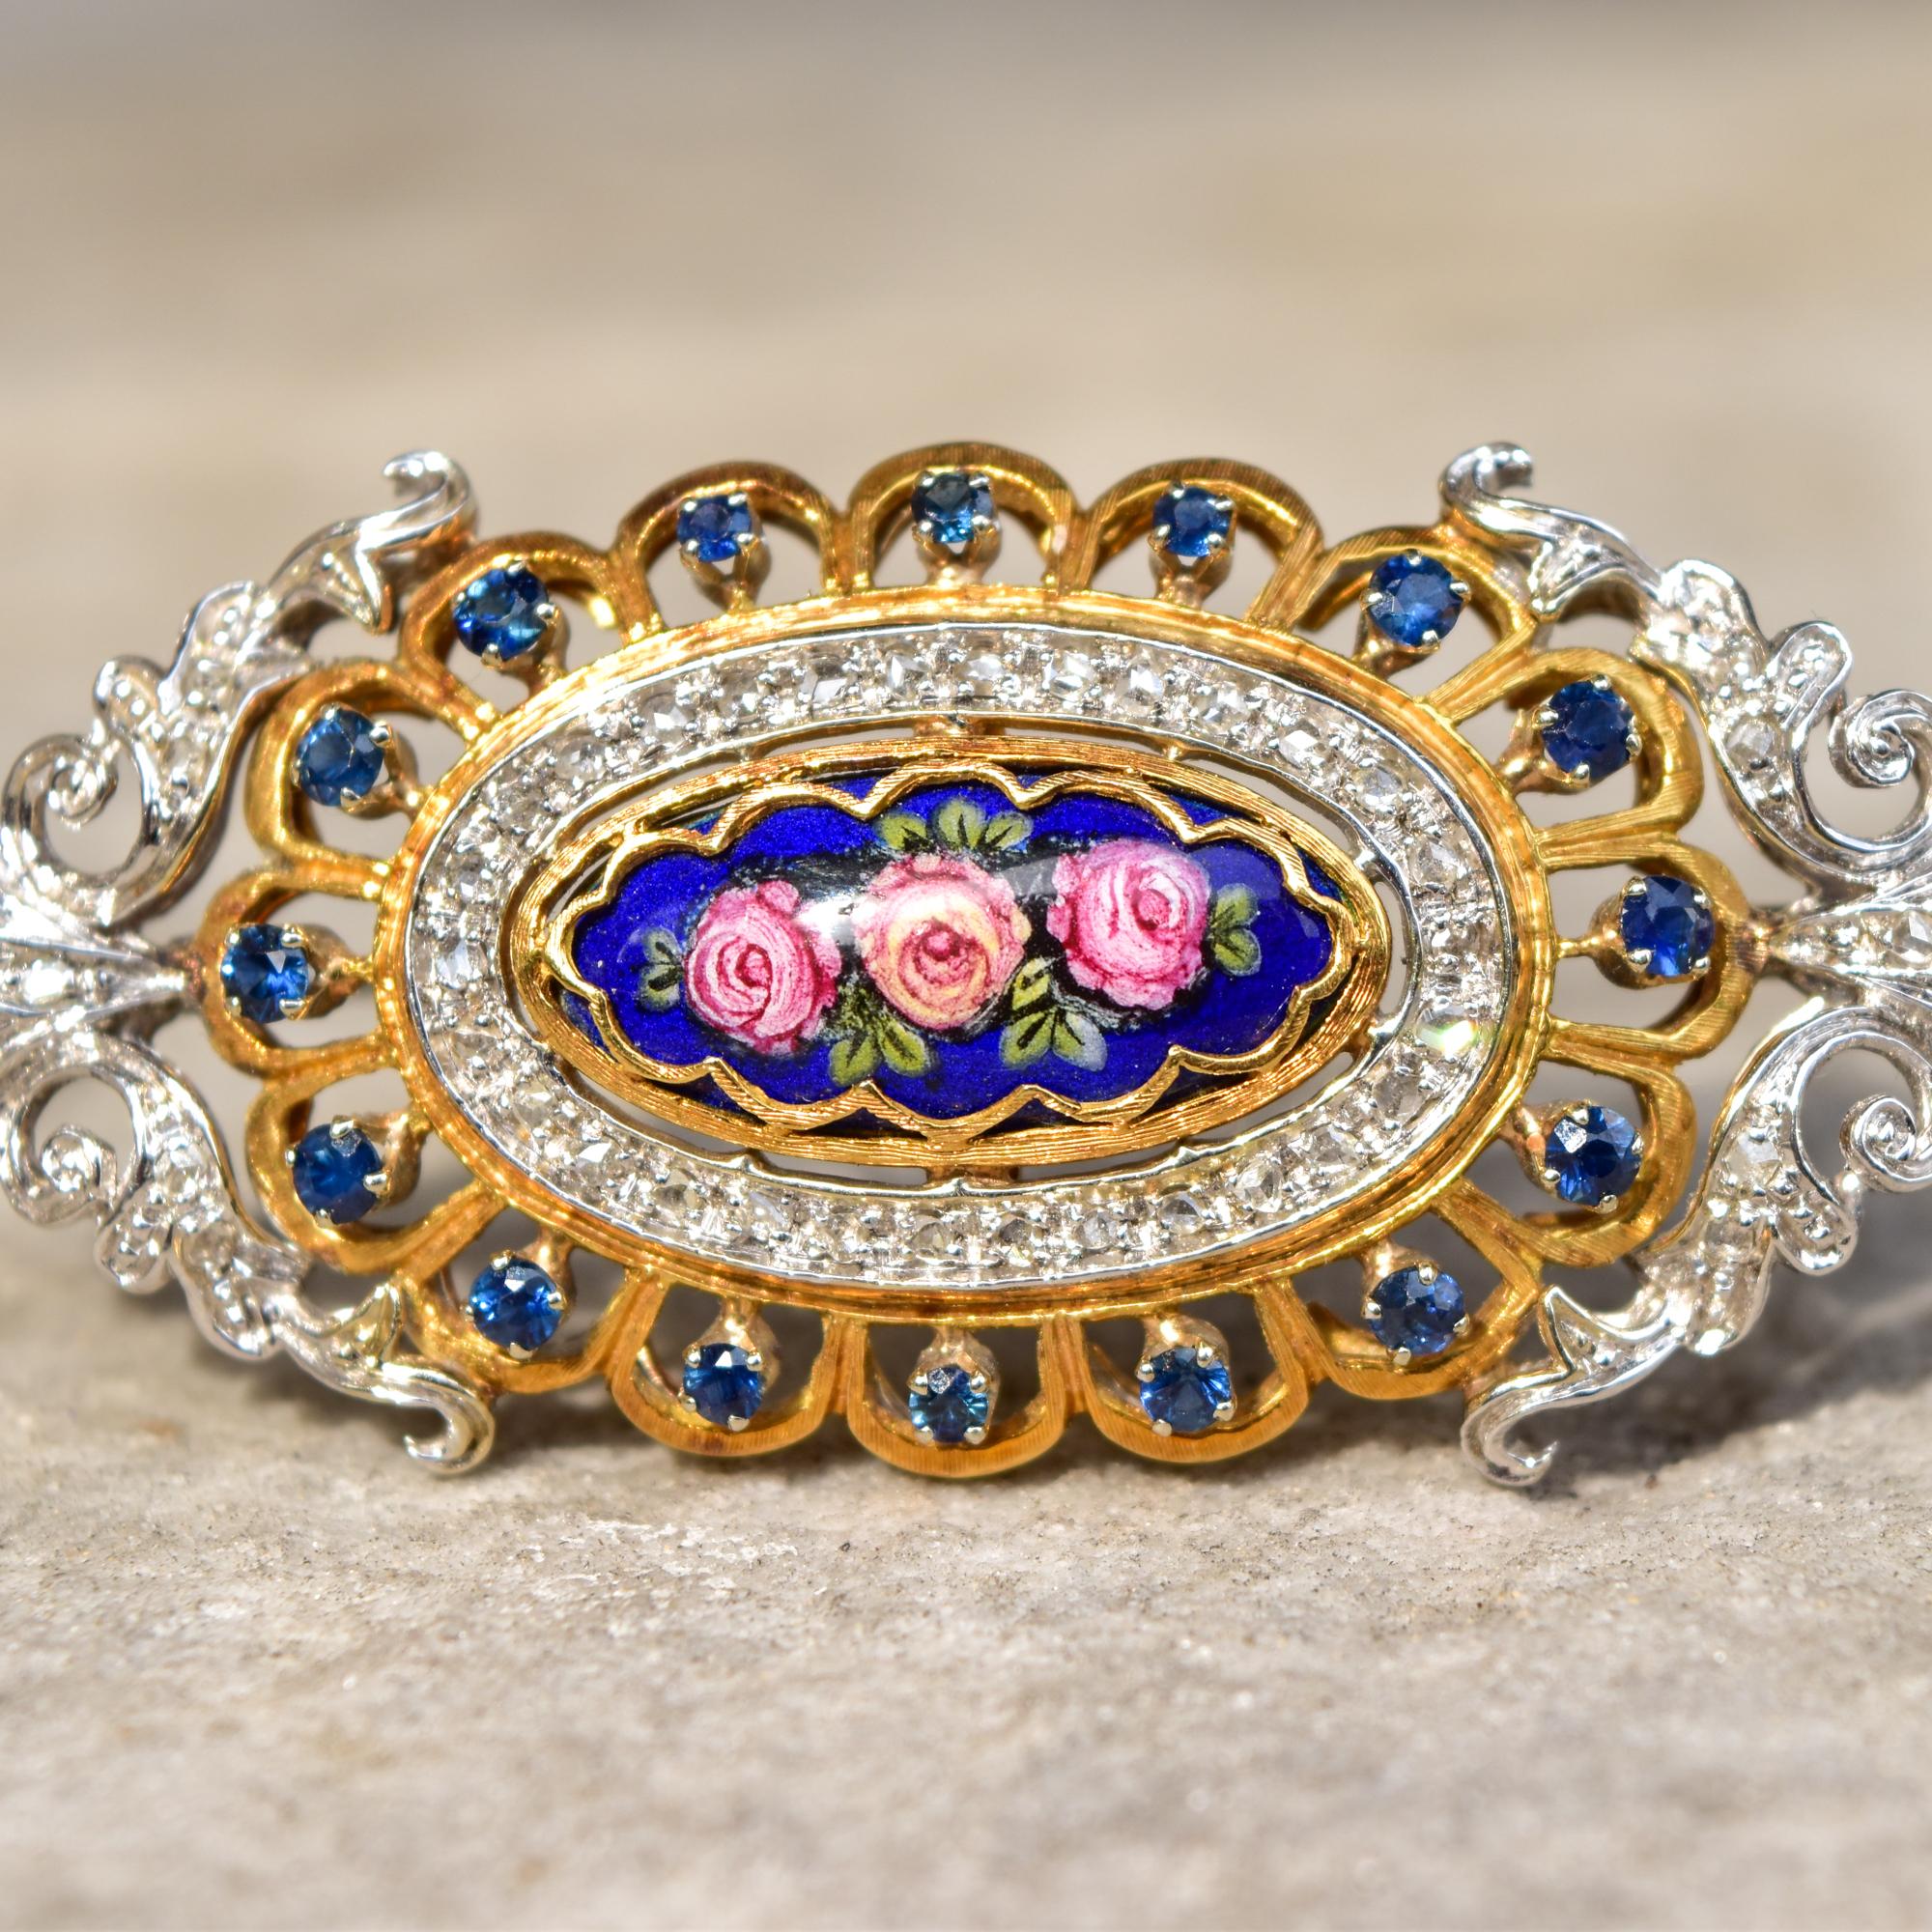 A breathtaking 18K diamond encrusted sapphire enamel flower brooch pendant by Toliro Italy. This piece is a true work of art and boasts bright yellow gold scallops, diamond studded white gold embellishments, and a dazzling sapphire halo. The focal